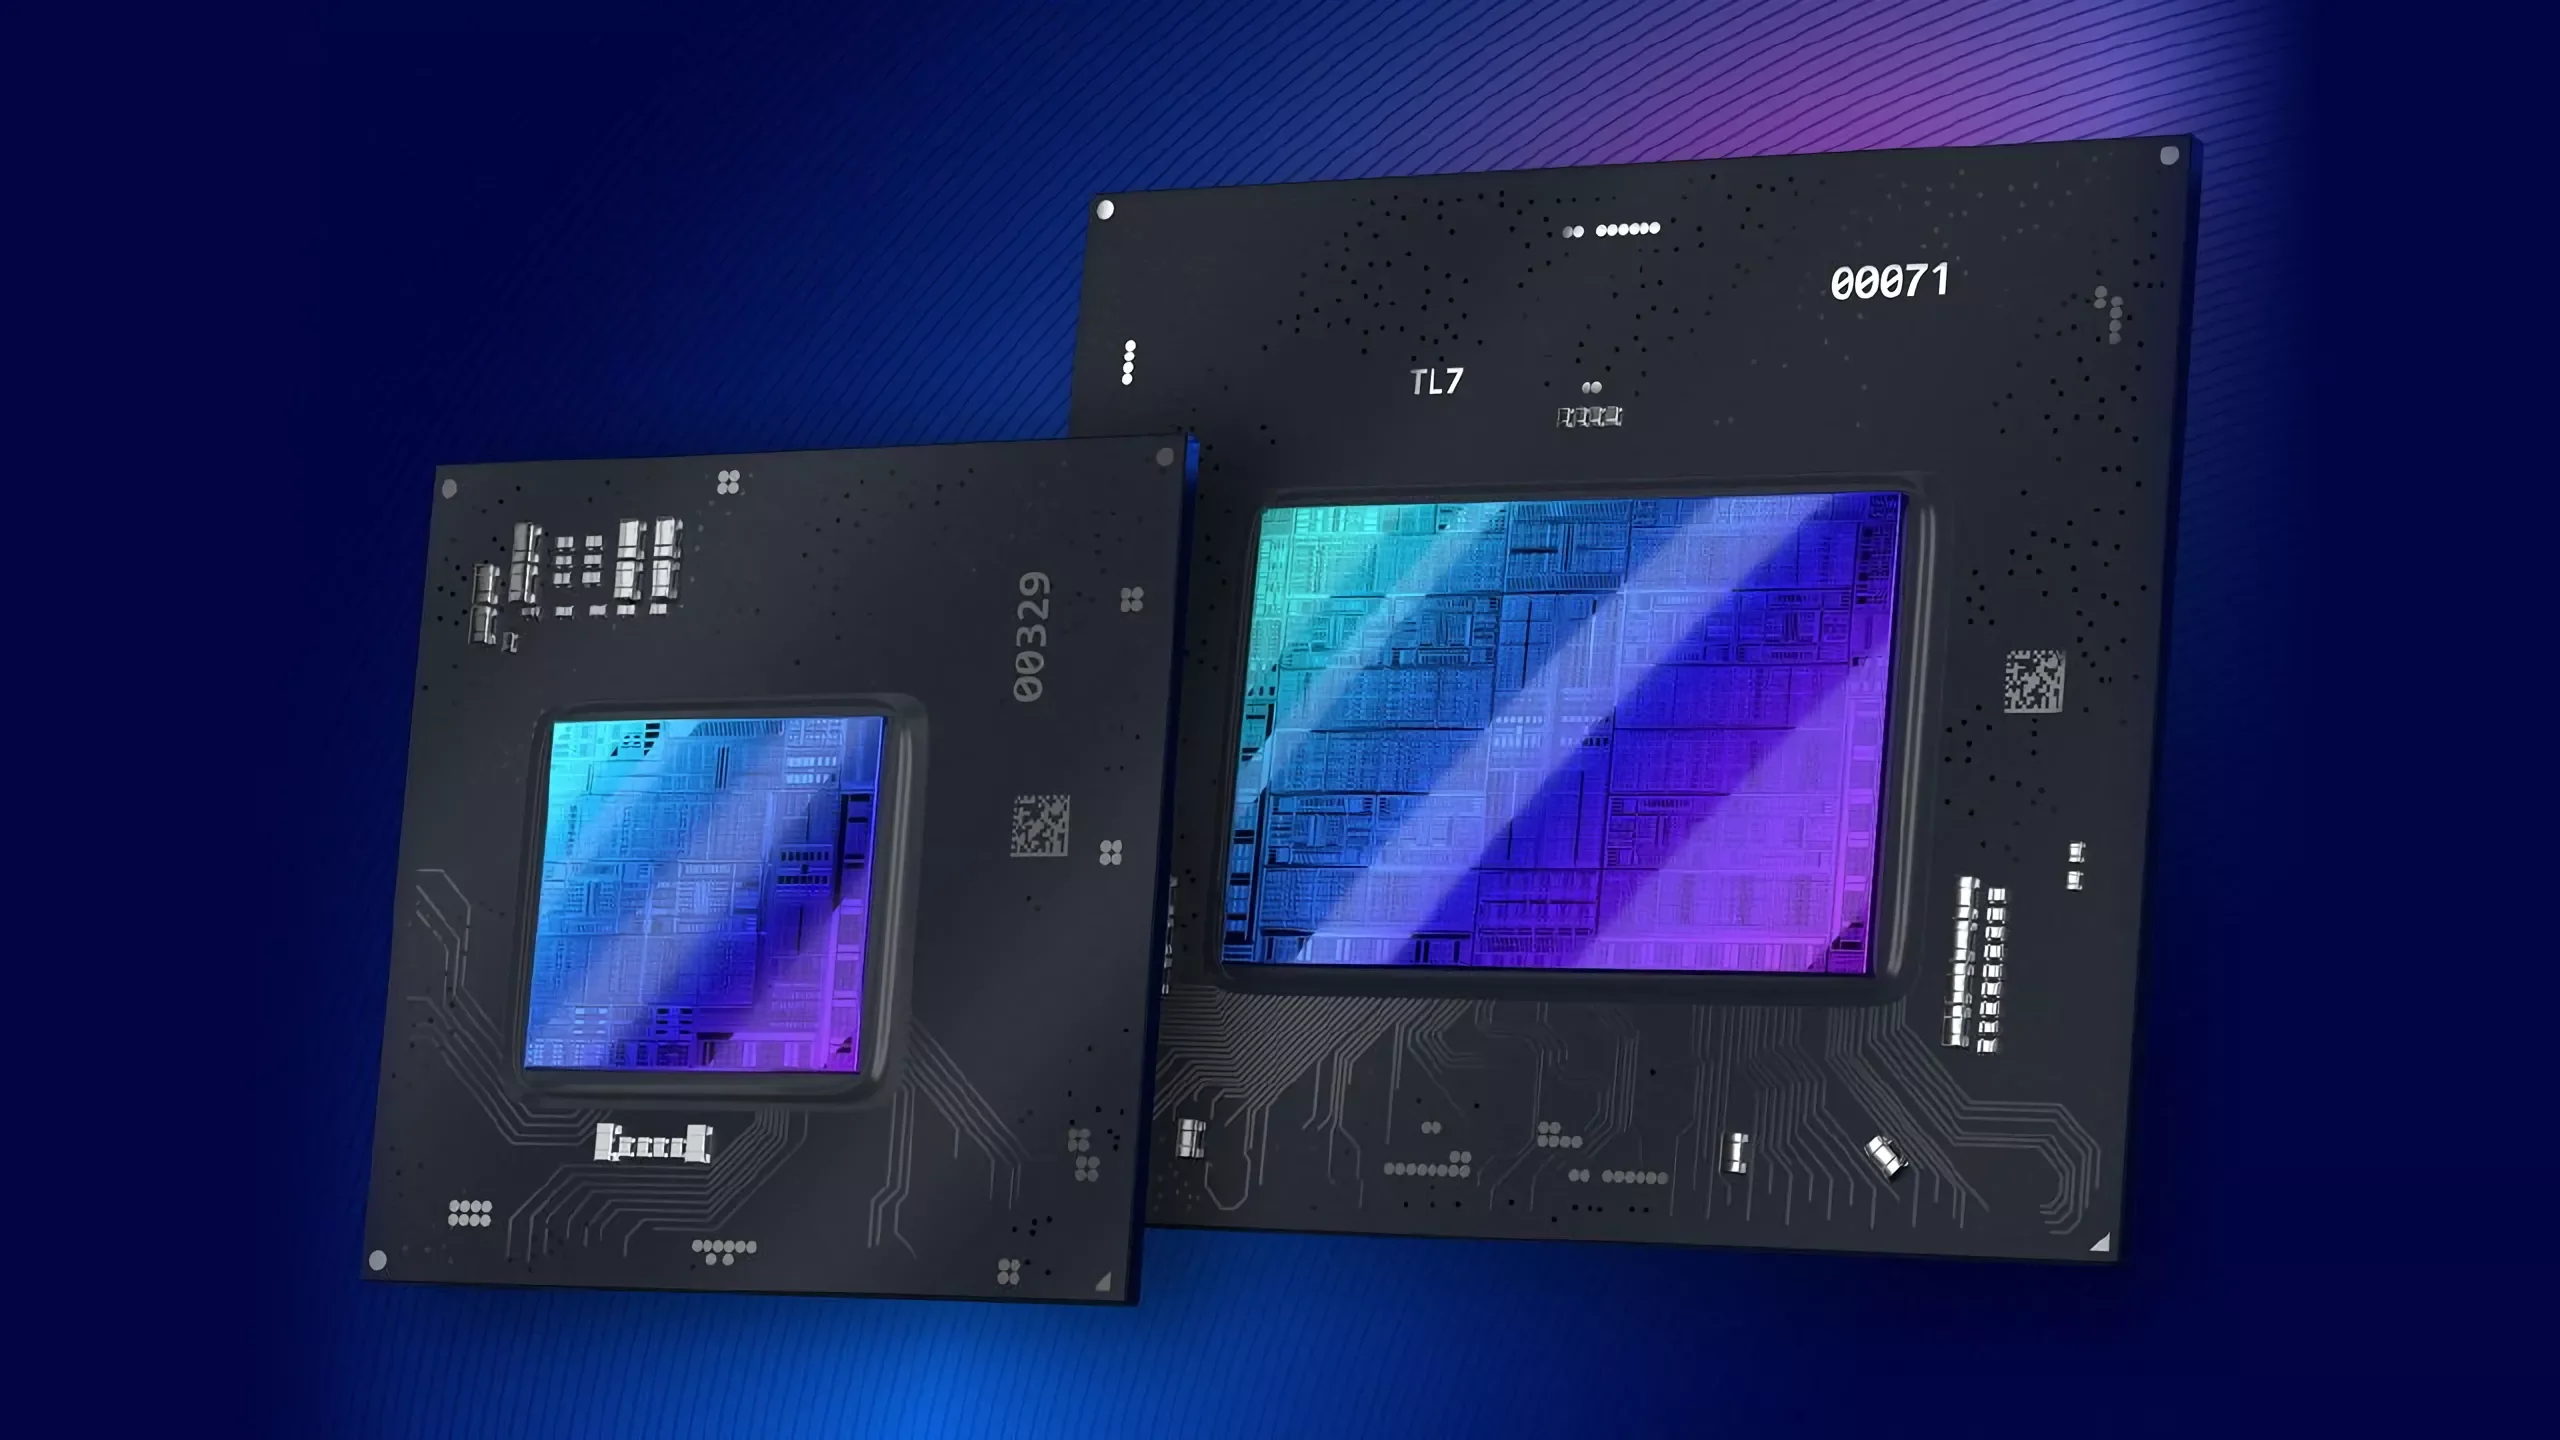 Intel presented five mobile graphics cards with ray tracing